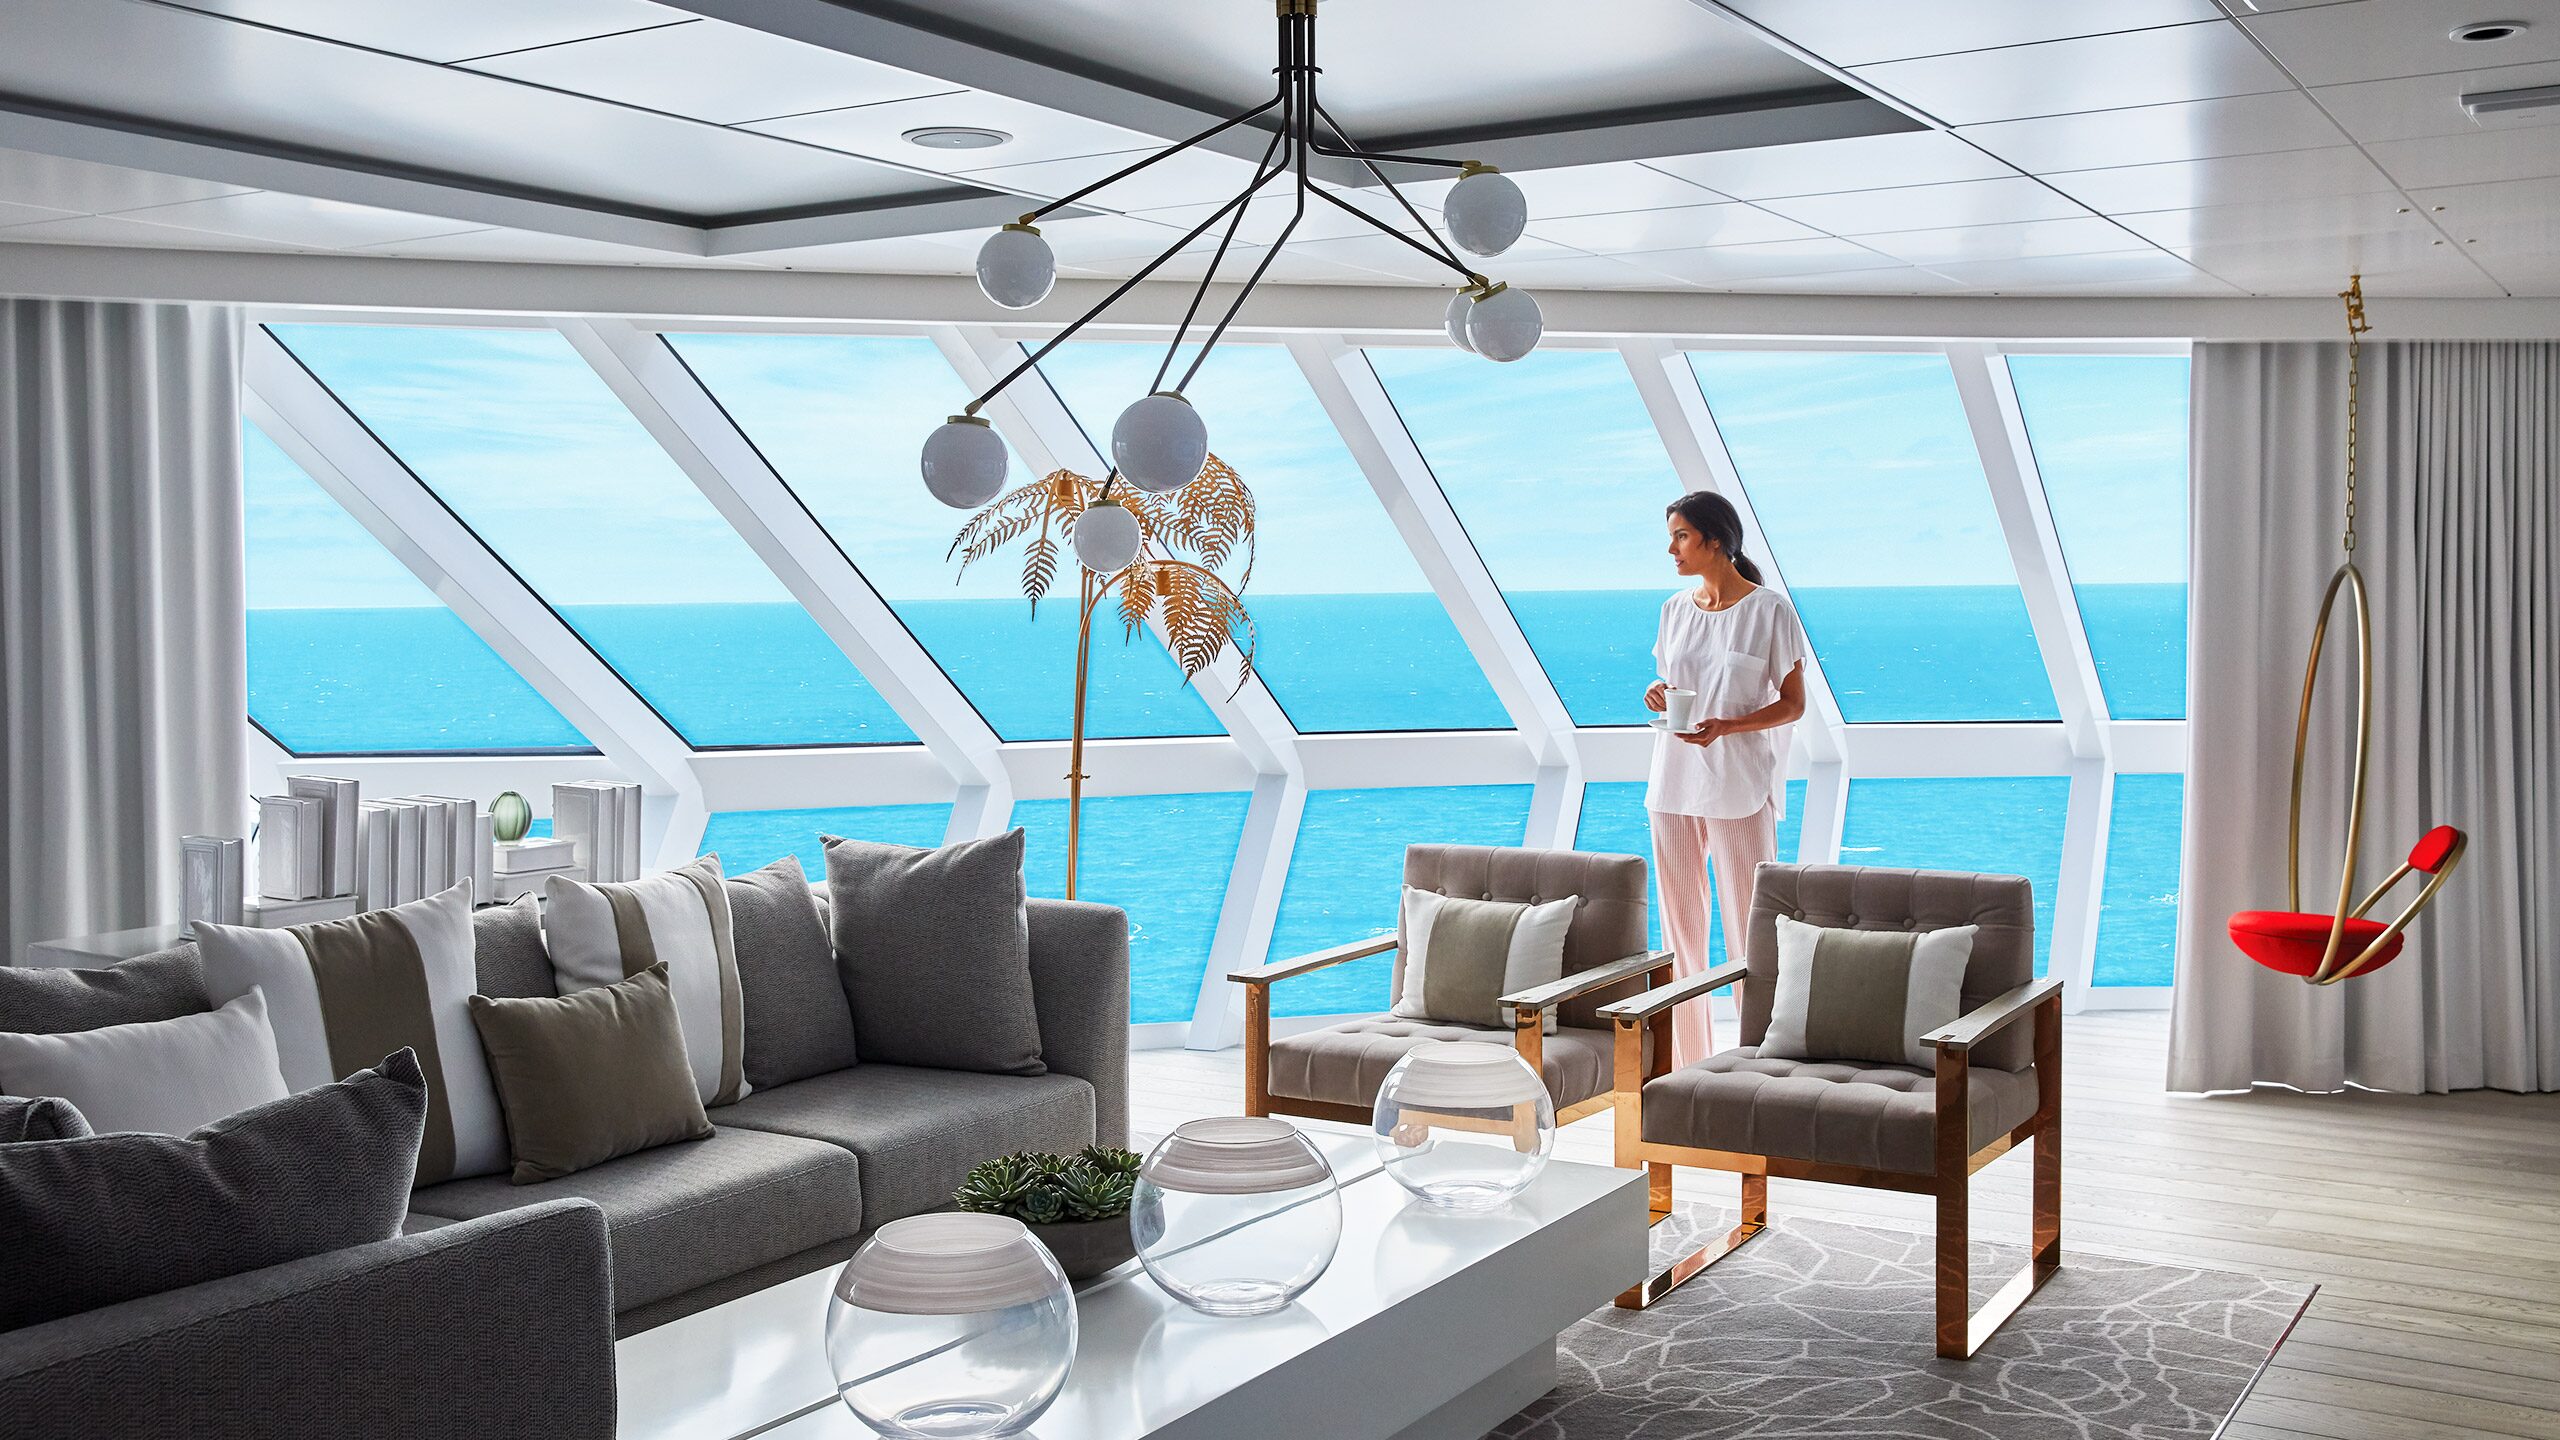 https://www.celebritycruises.com/content/dam/celebrity/new-images/staterooms/the-retreat-tank/celebrity-guest-in-iconic-suite-2560x1440.jpg